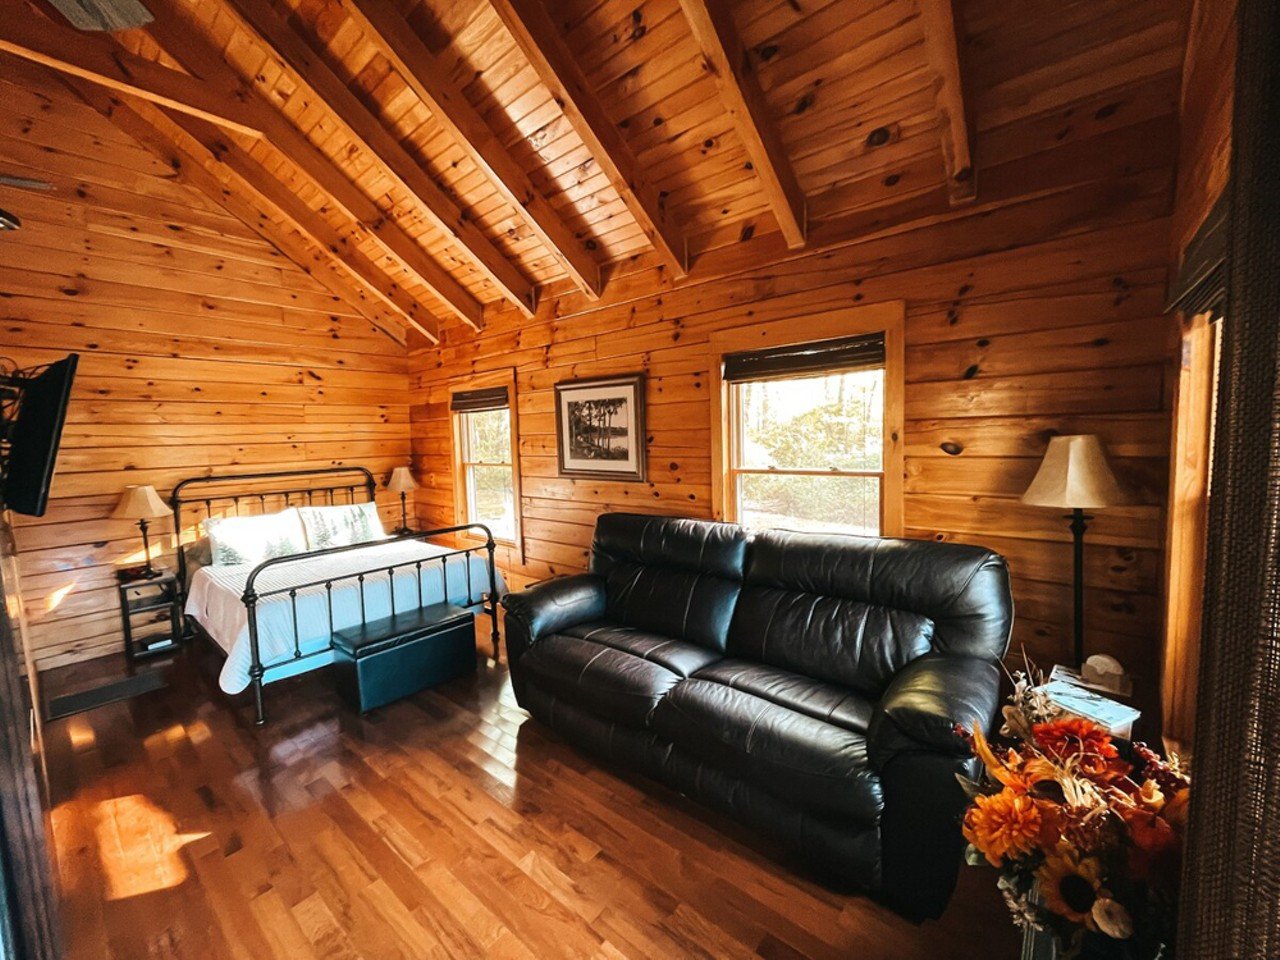 Peaceful getaway, perfect for couples
Entire Cabin | Starting at $116/night | Hosts 2 Guests 
&#147;Step away from fast paced life to experience true relaxation at our tiny cabin, situated in the one stop light town with some of the country's best internet! Located in the heart of the Daniel Boone National Forest, Hemlock Haven has been customized to be a nature lovers paradise.&#148;